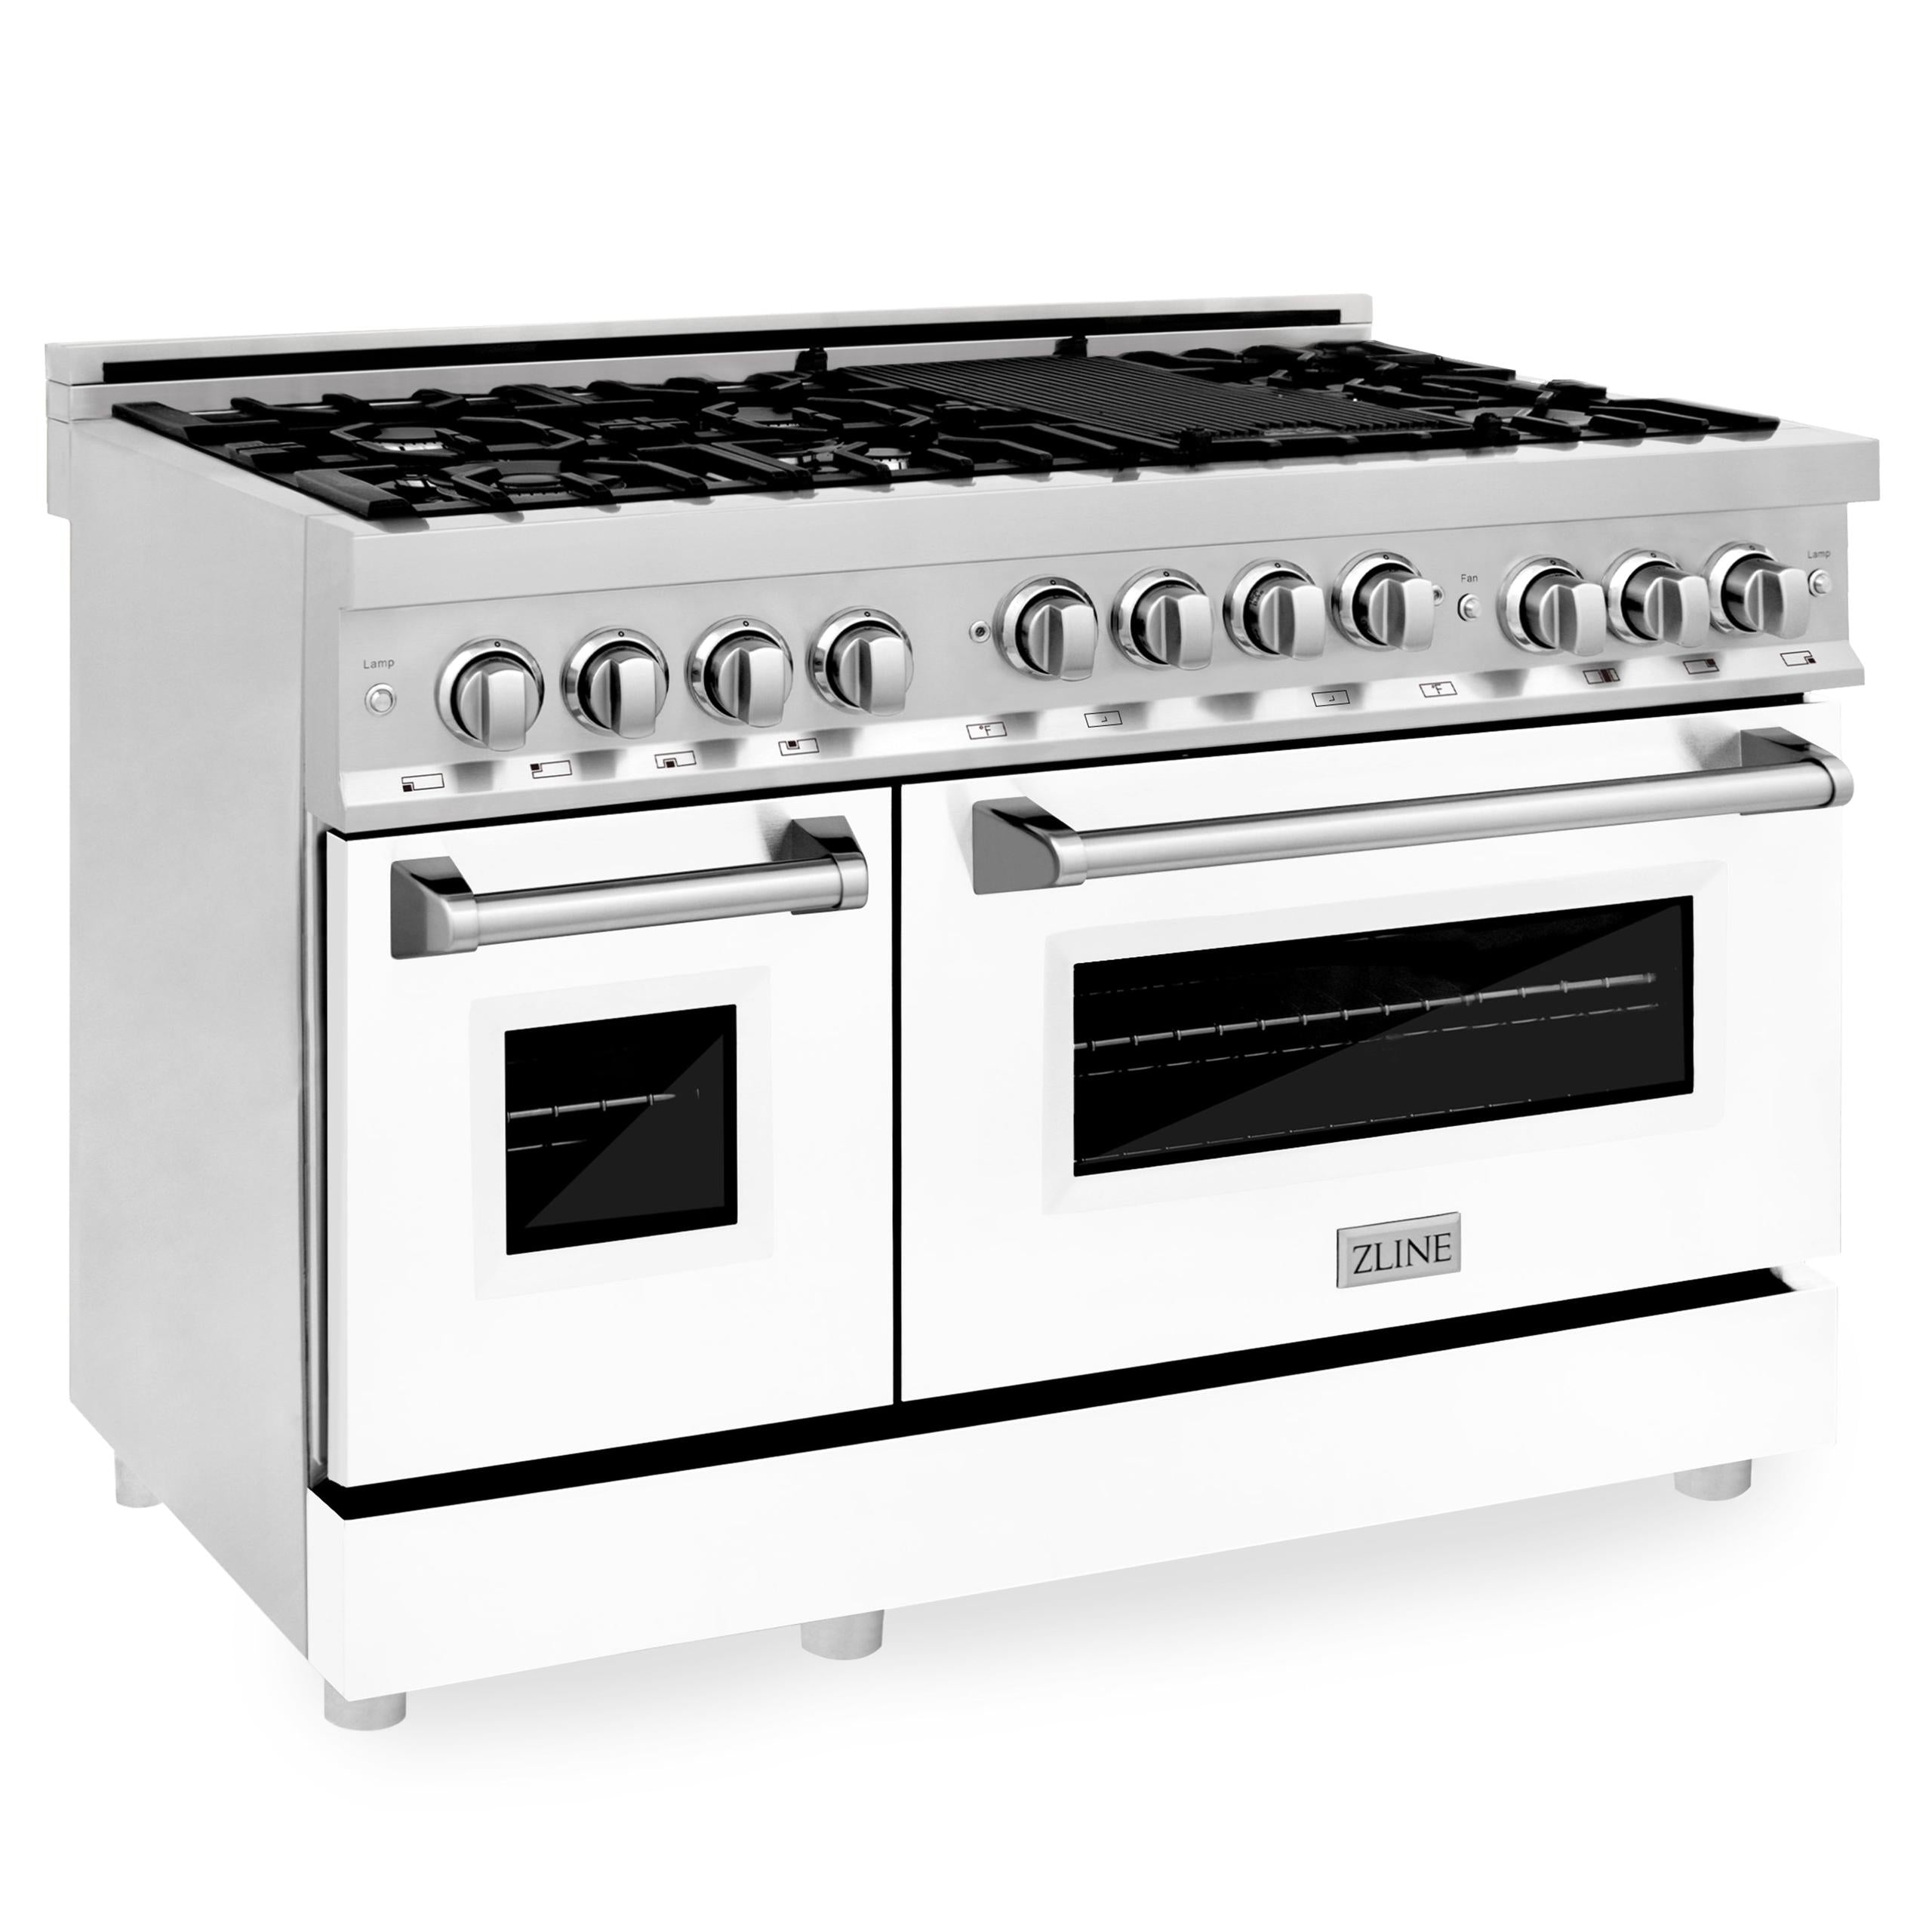 ZLINE KITCHEN AND BATH RGBG48 ZLINE 48" 6.0 cu. ft. Range with Gas Stove and Gas Oven in Stainless Steel Color: Blue Gloss